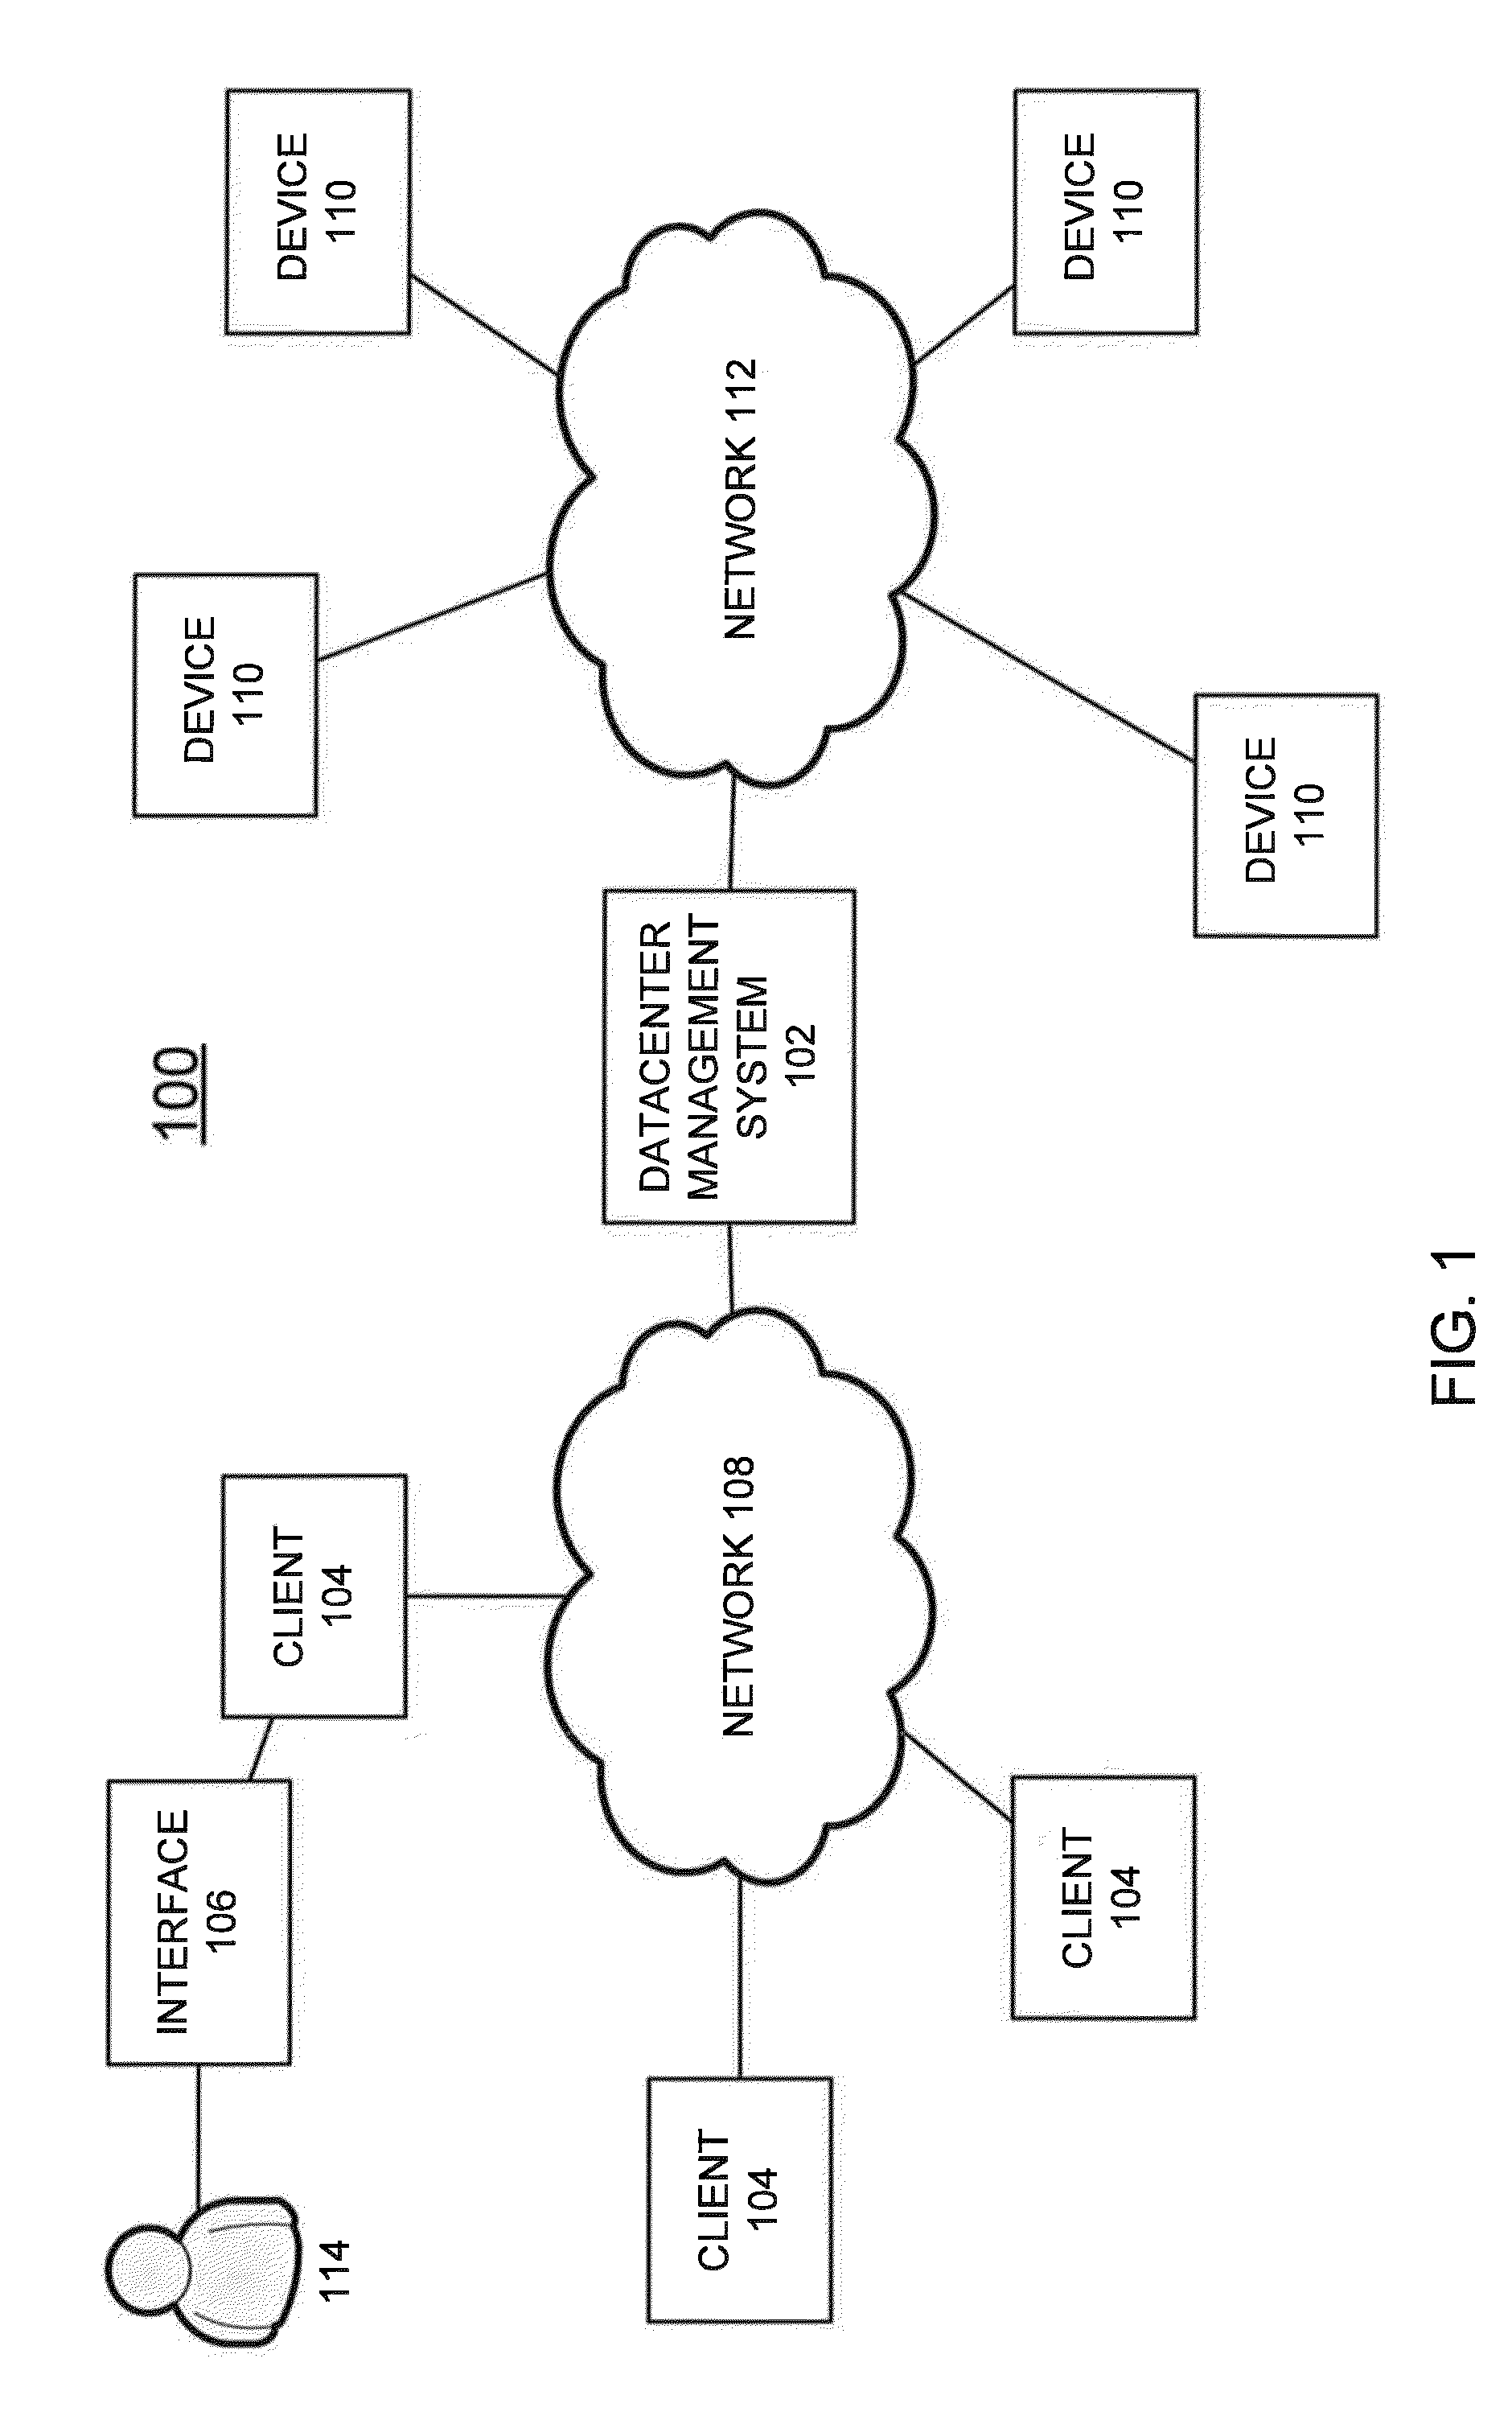 Method and system for associating devices with a coverage area for a camera